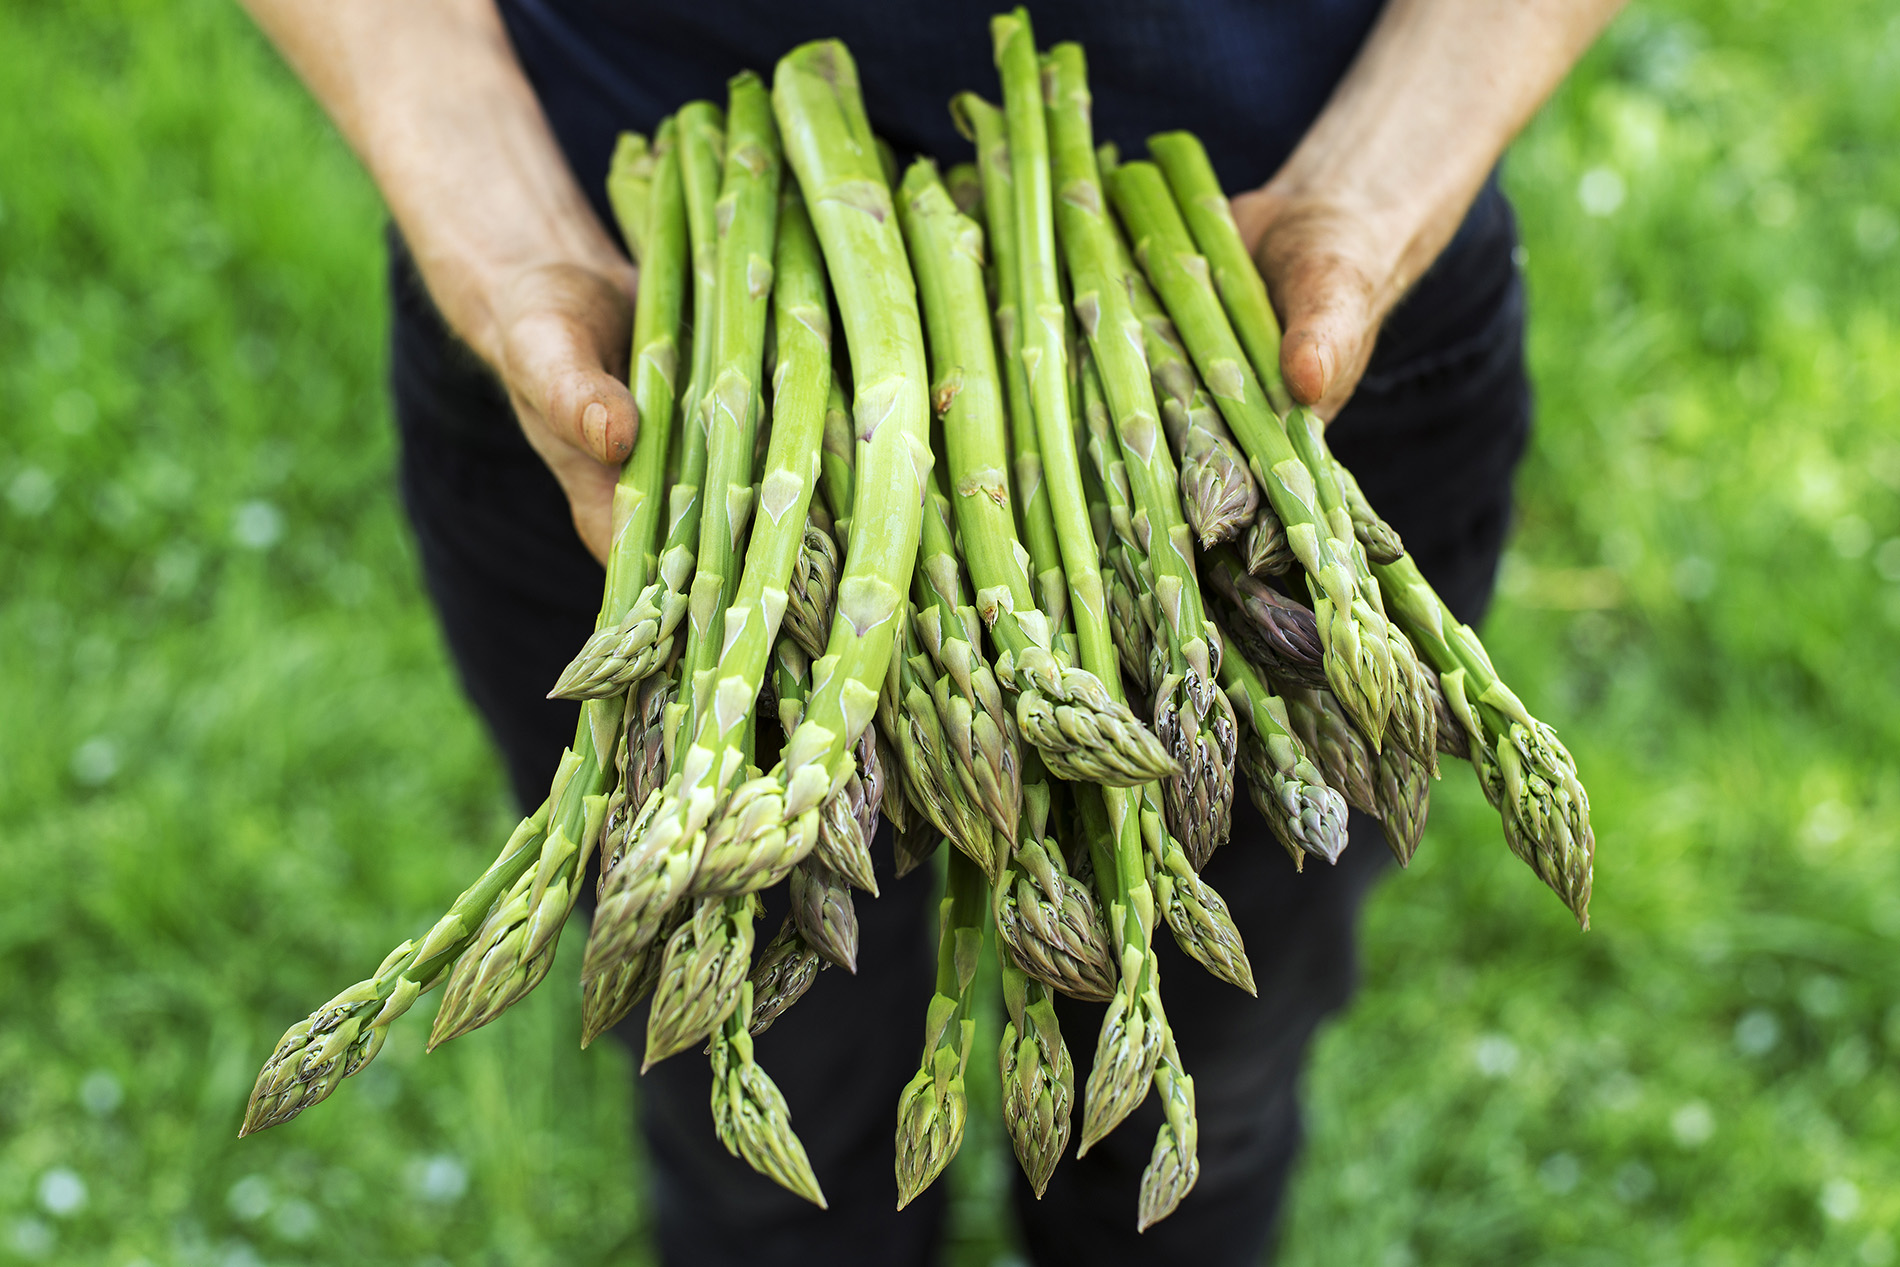 Woman in field holding freshly picked asparagus